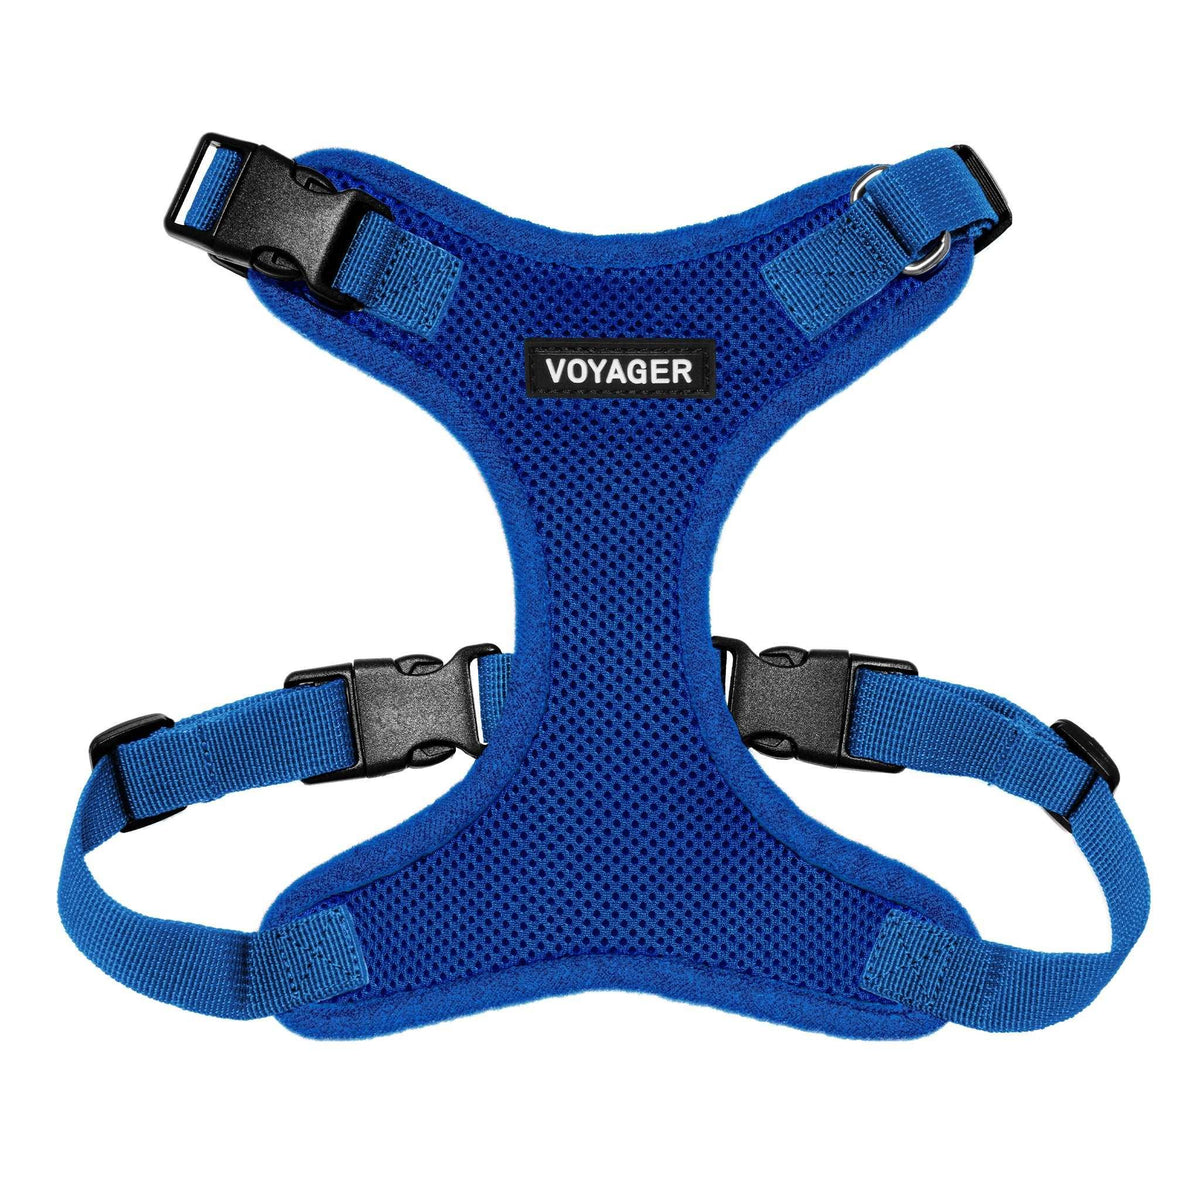 VOYAGER Step-In Lock Dog Harness in Royal Blue with Matching Trim and Webbing - Front